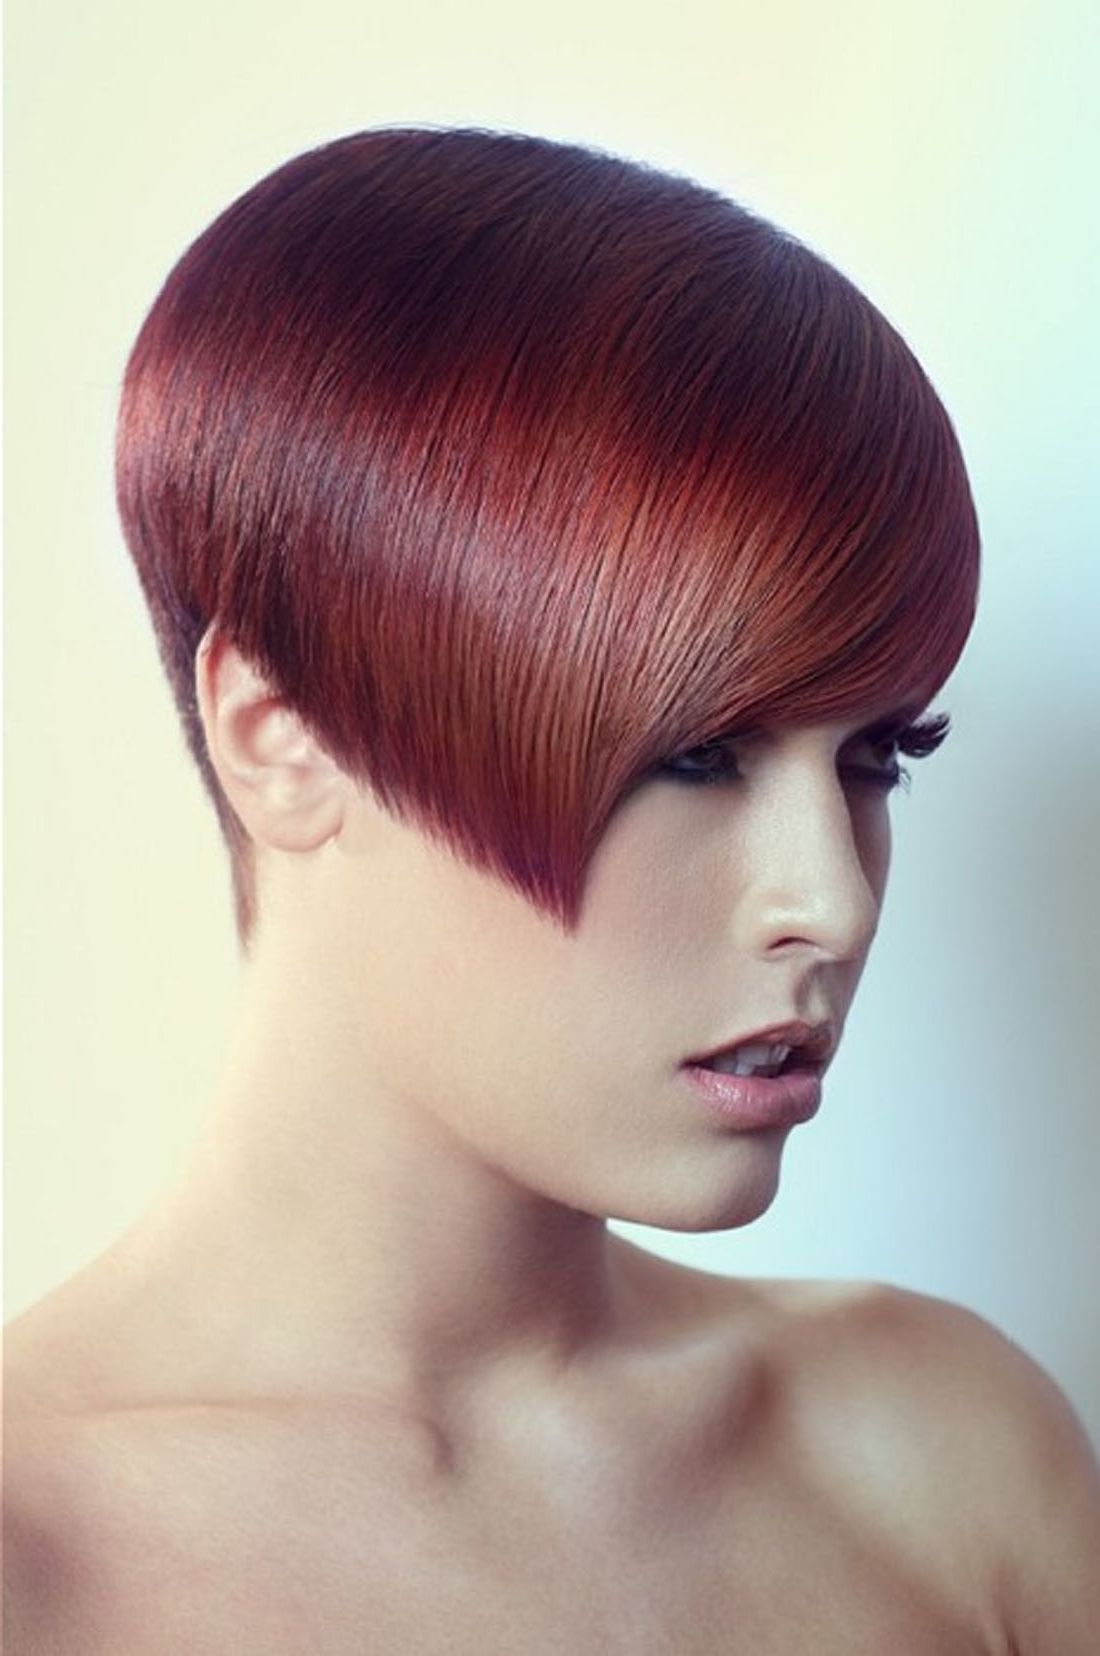 Red And Black Hairstyles For Short Hair – Hairstyle For Women & Man Intended For Red And Black Short Hairstyles (Photo 5 of 25)